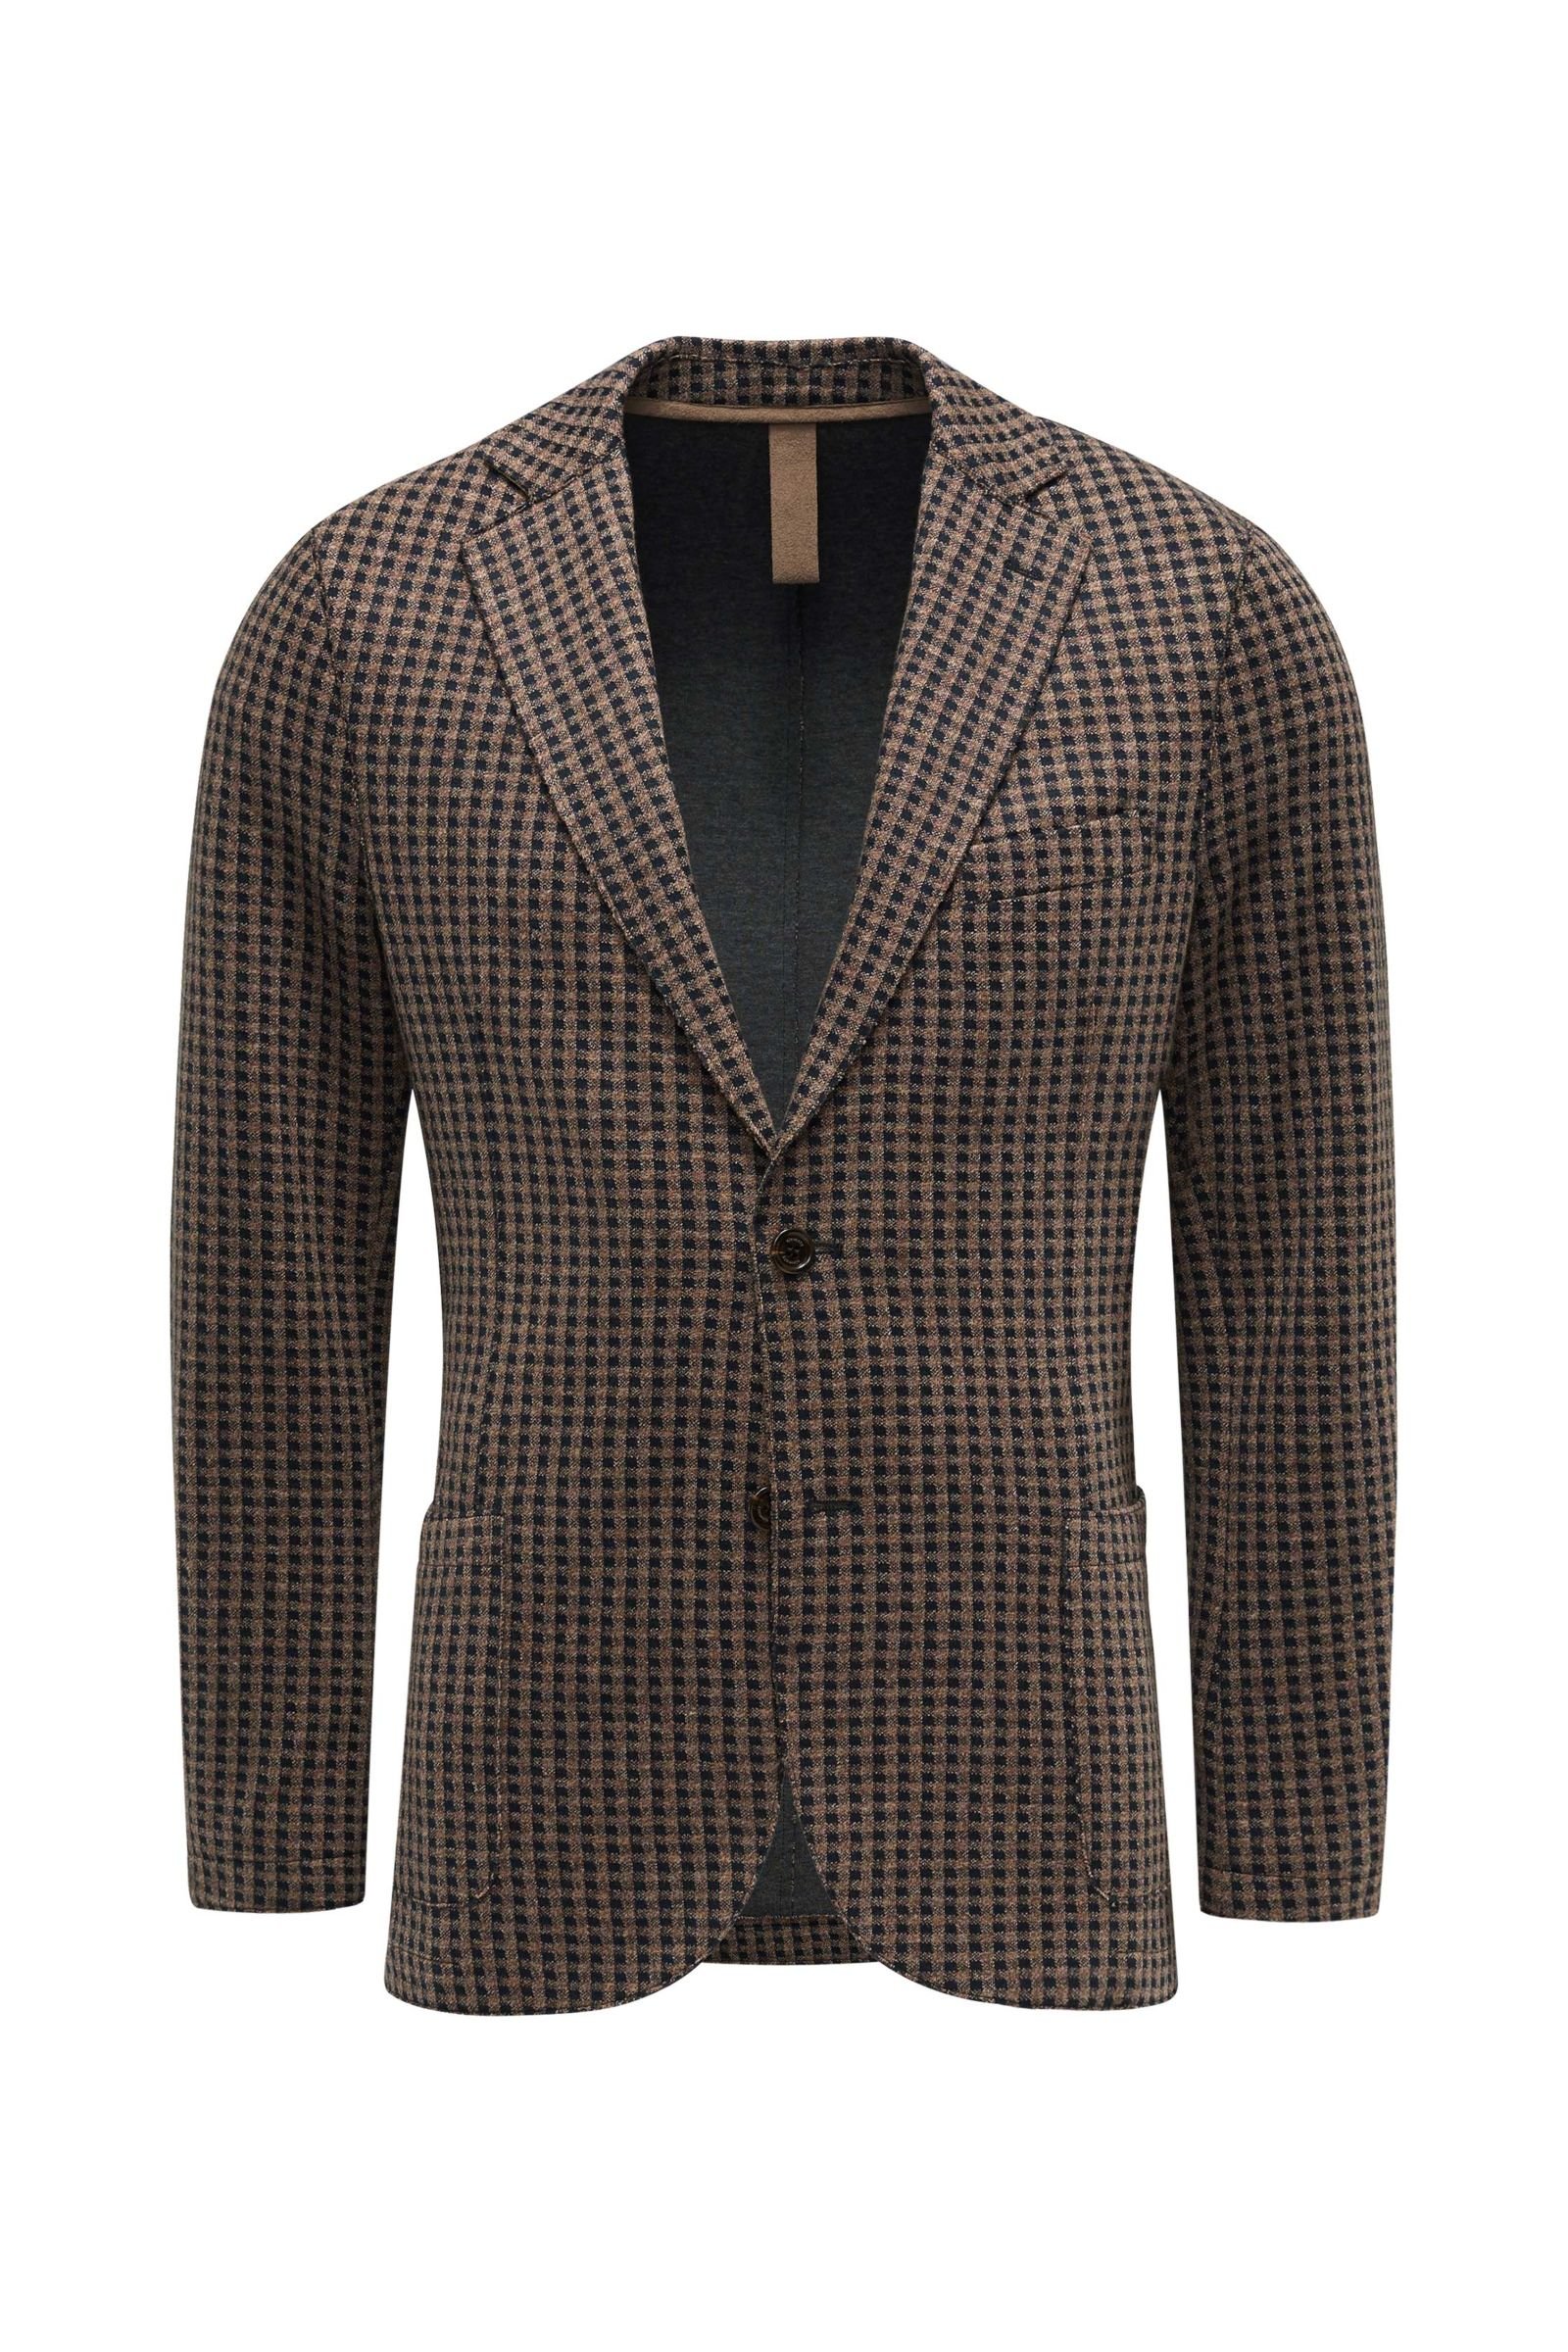 Jersey smart-casual jacket brown/navy checked